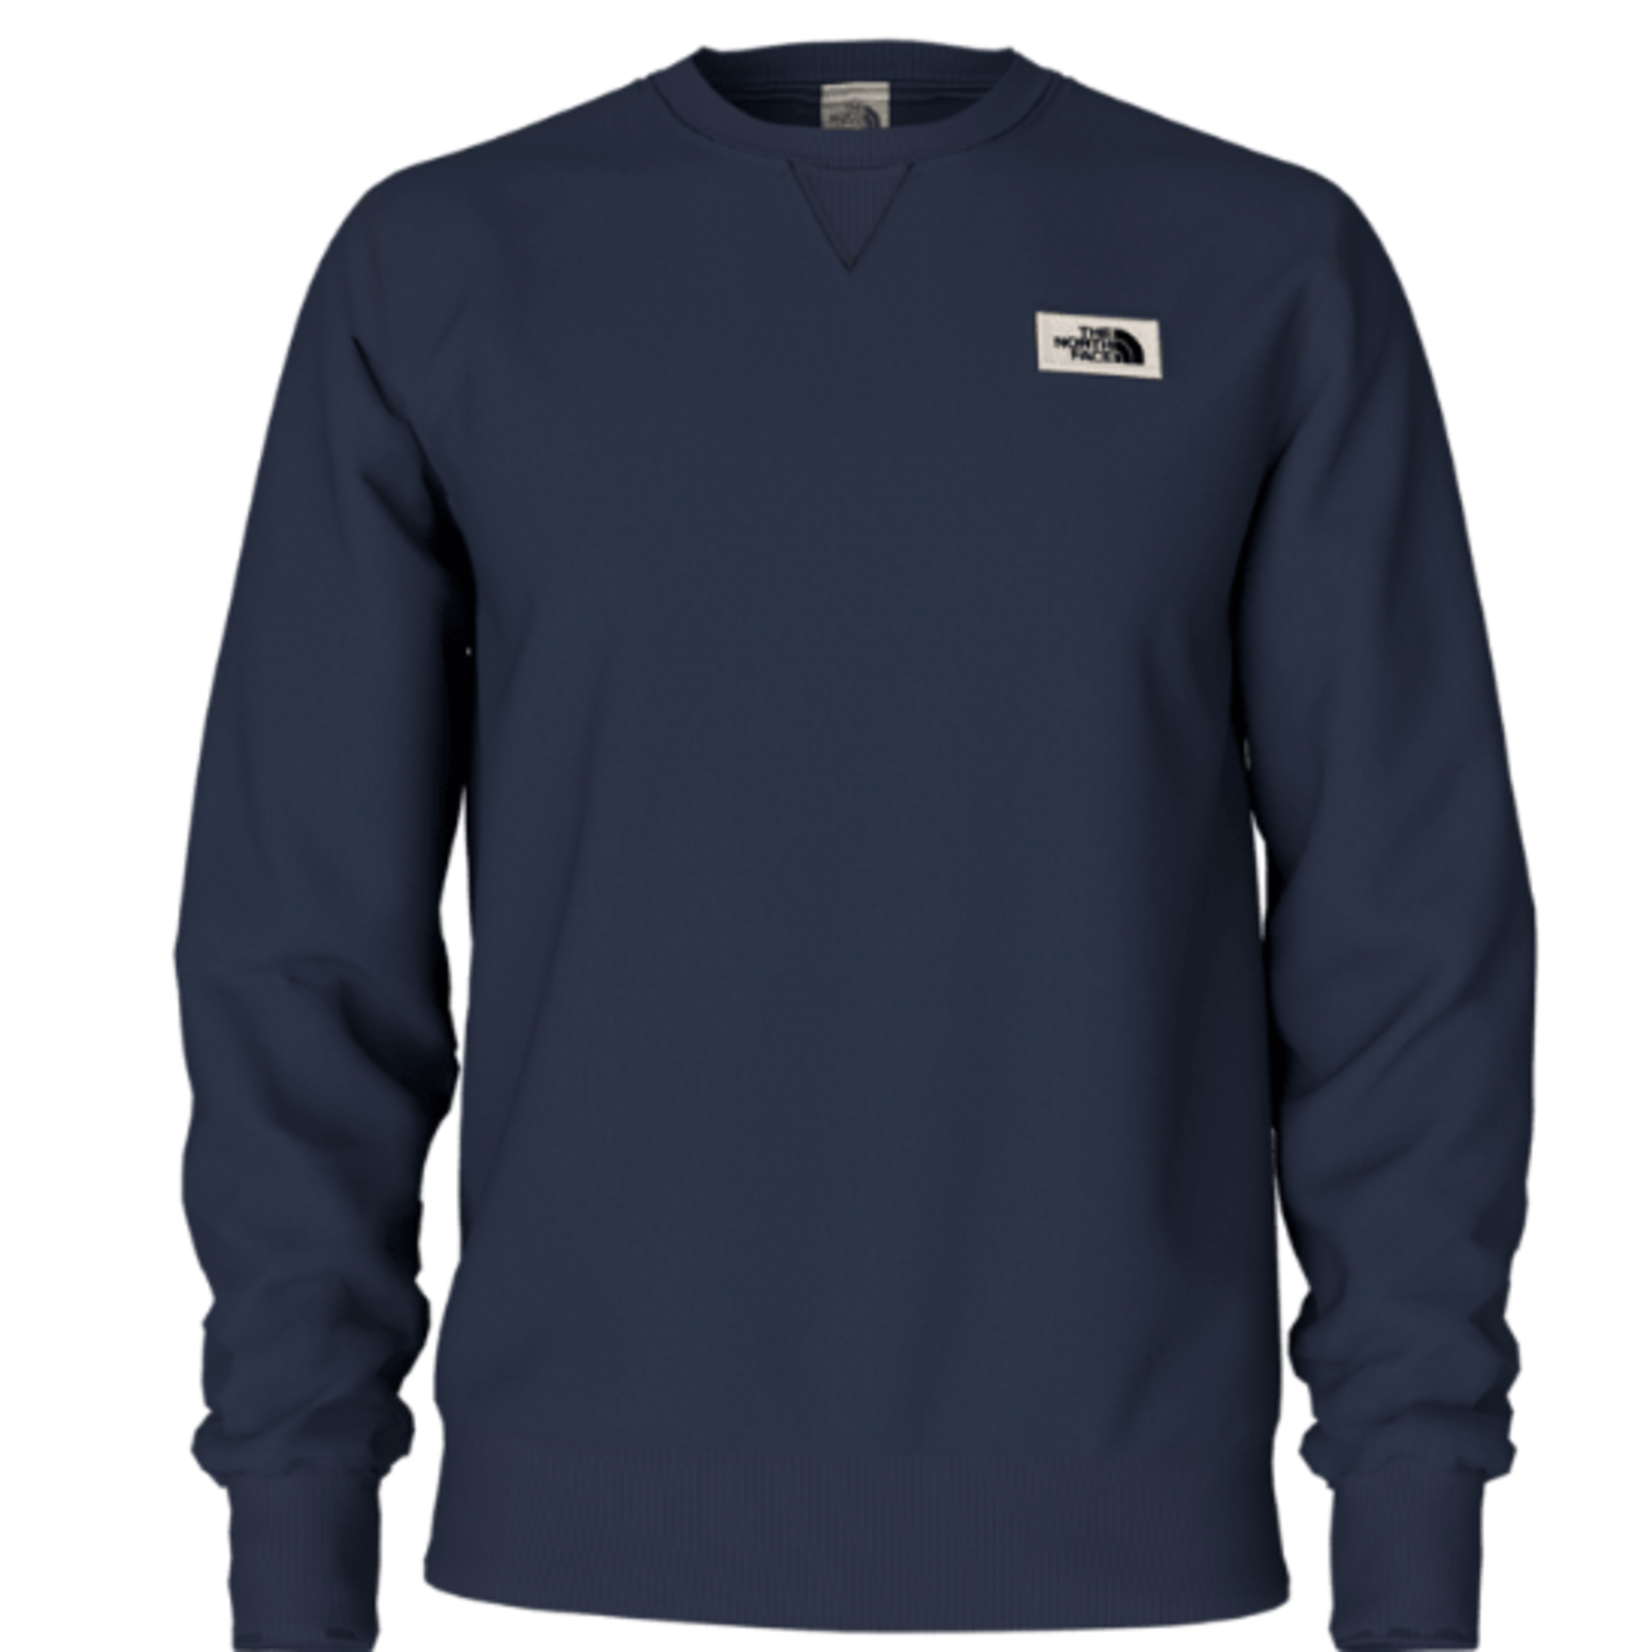 THE NORTH FACE Men's Heritage Patch Crew- 24